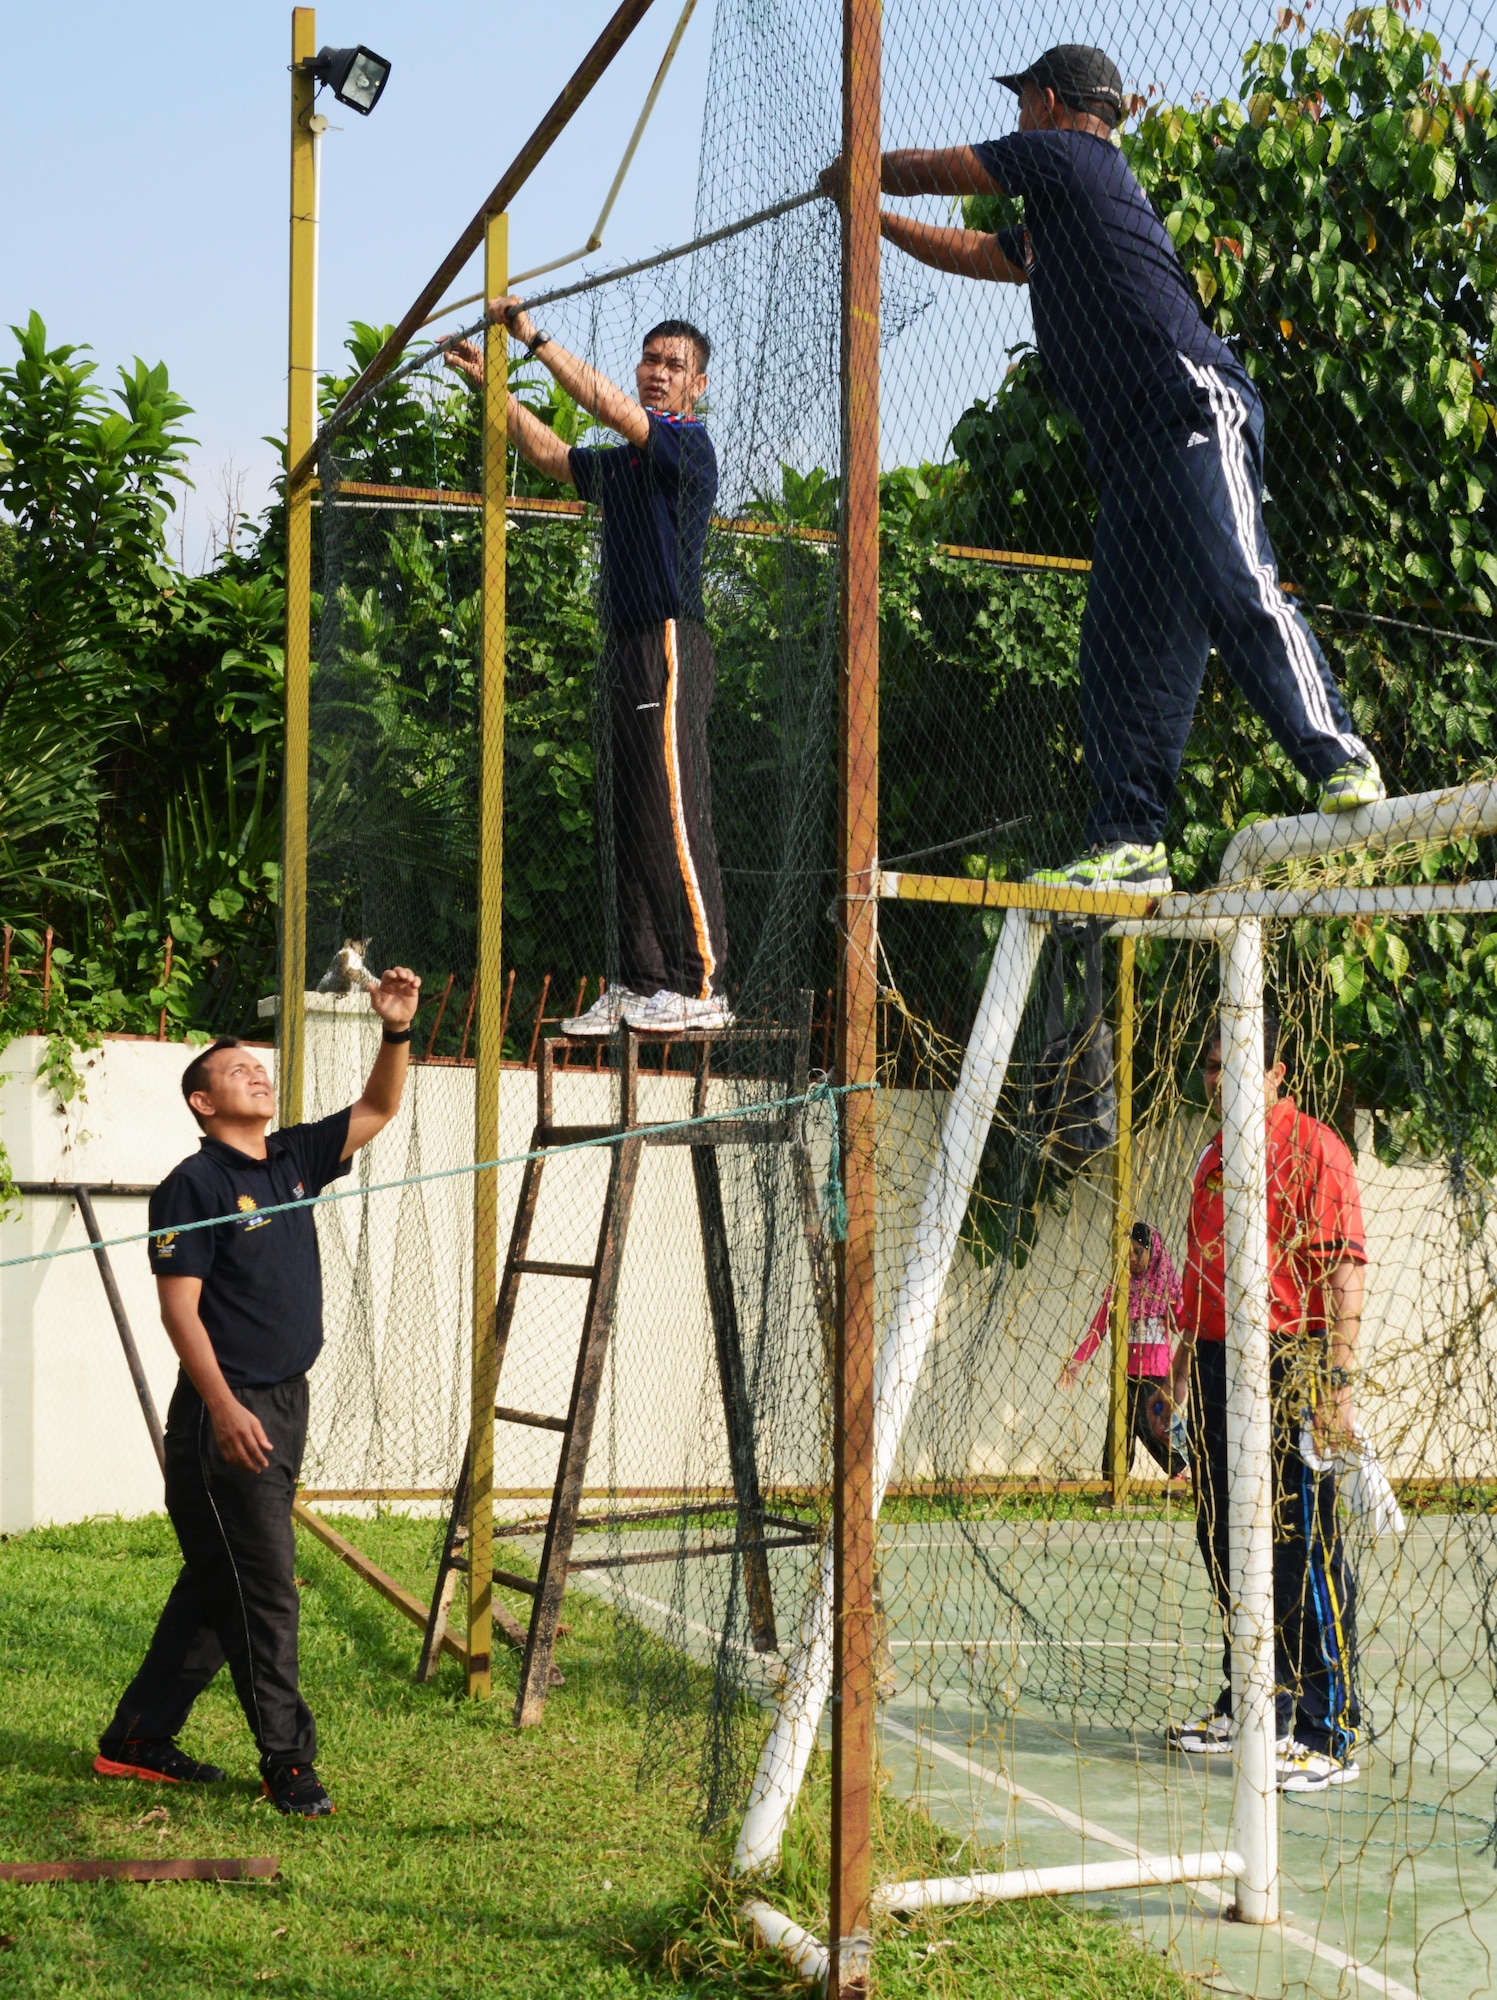 Members from the Royal Malaysian Air Force repair fencing around the soccer pitch at the Rumah Kasih Hormoni Orphanage near Kuala Lumpur, Malayasia, June 6, 2015 As part of Exercise Teak Mint, members from the RMAF, U.S. Air Force came together to help with repairs around the orphanages and  donated more than  $1,000 in clothes, games and sports equipment.  (U.S. Air Force Tech. Sgt. Kristine Dreyer)